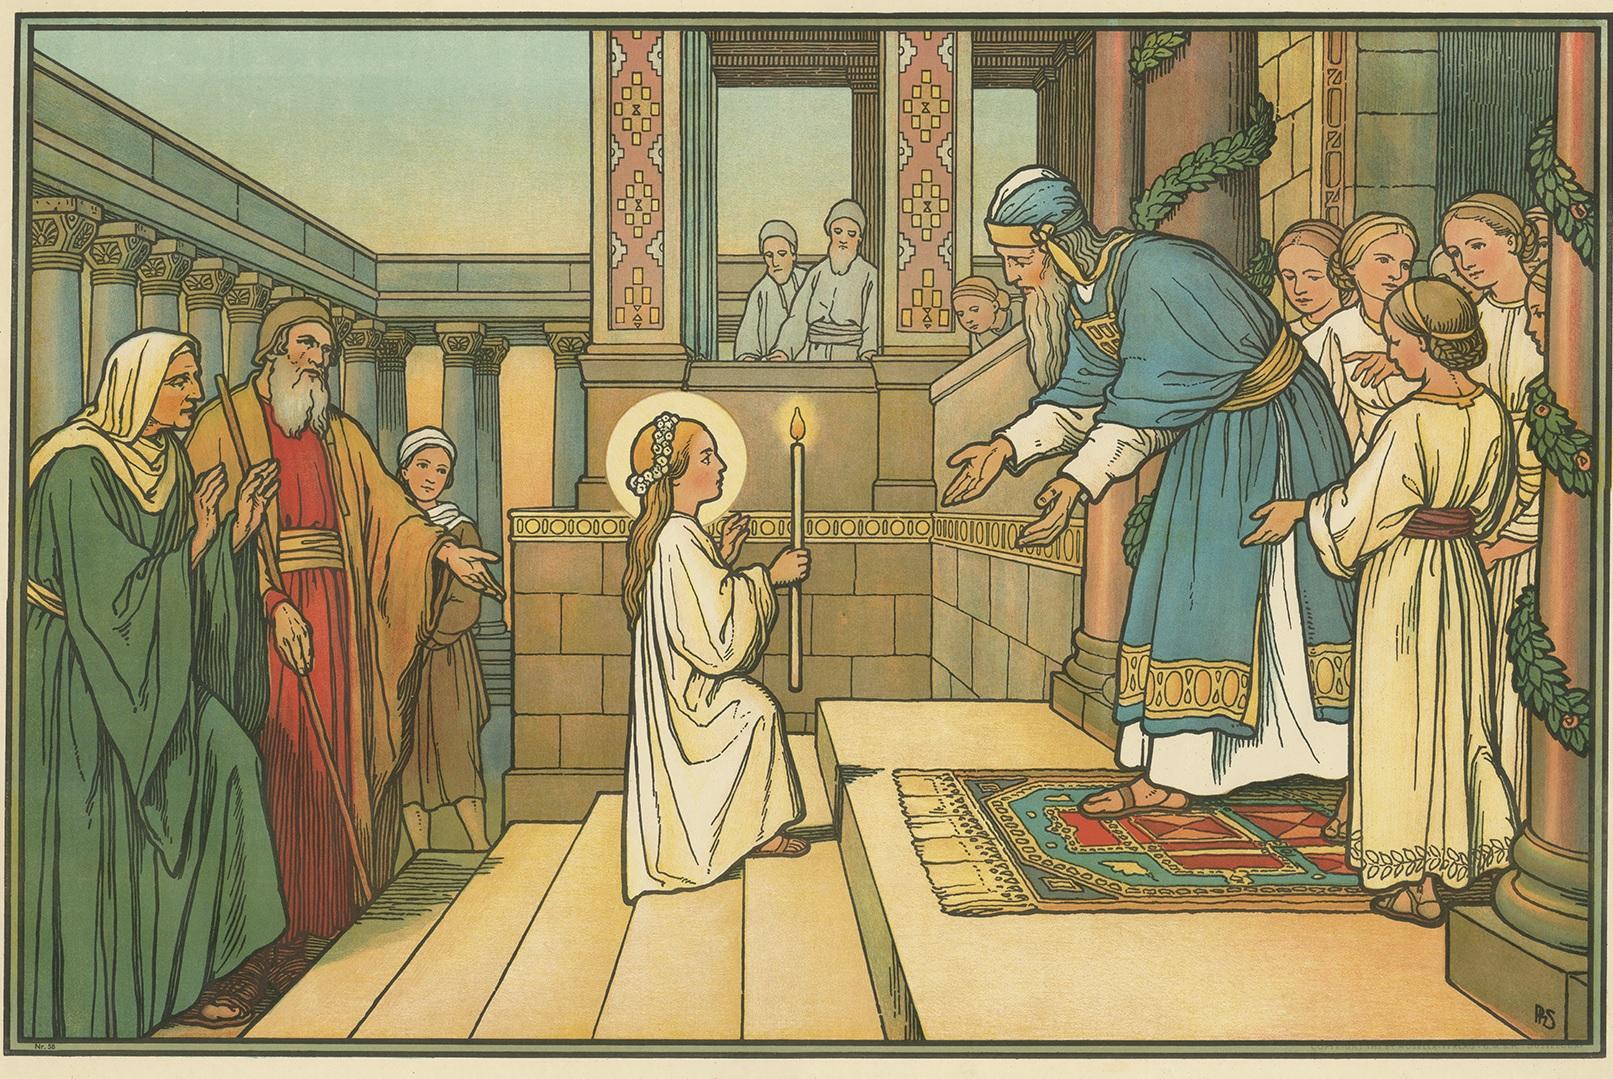 Large antique print of the presentation of Mary. Published by Mosella-Verlag, 1913. This print originates from a series titled 'Kathol. Schulbibelwerk von Dr. Ecker'.